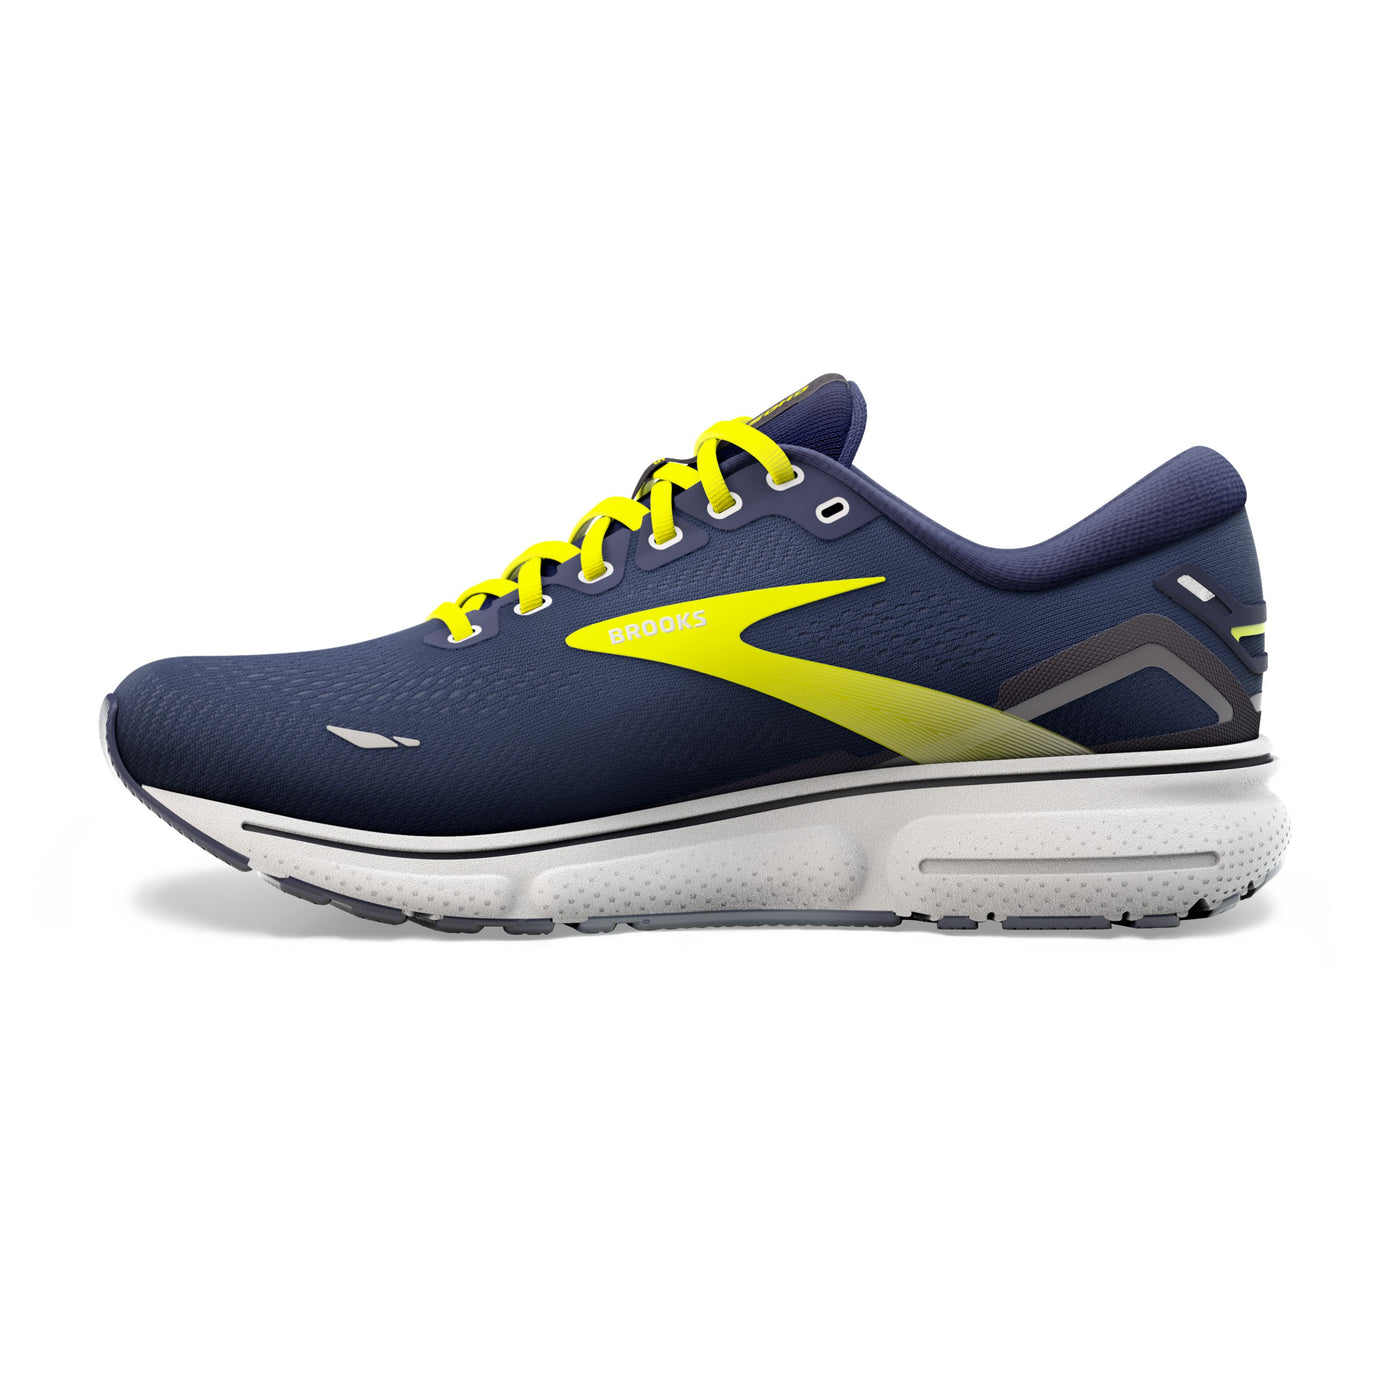 Brooks Ghost 15 White Yellow Sneakers: At the Best Price